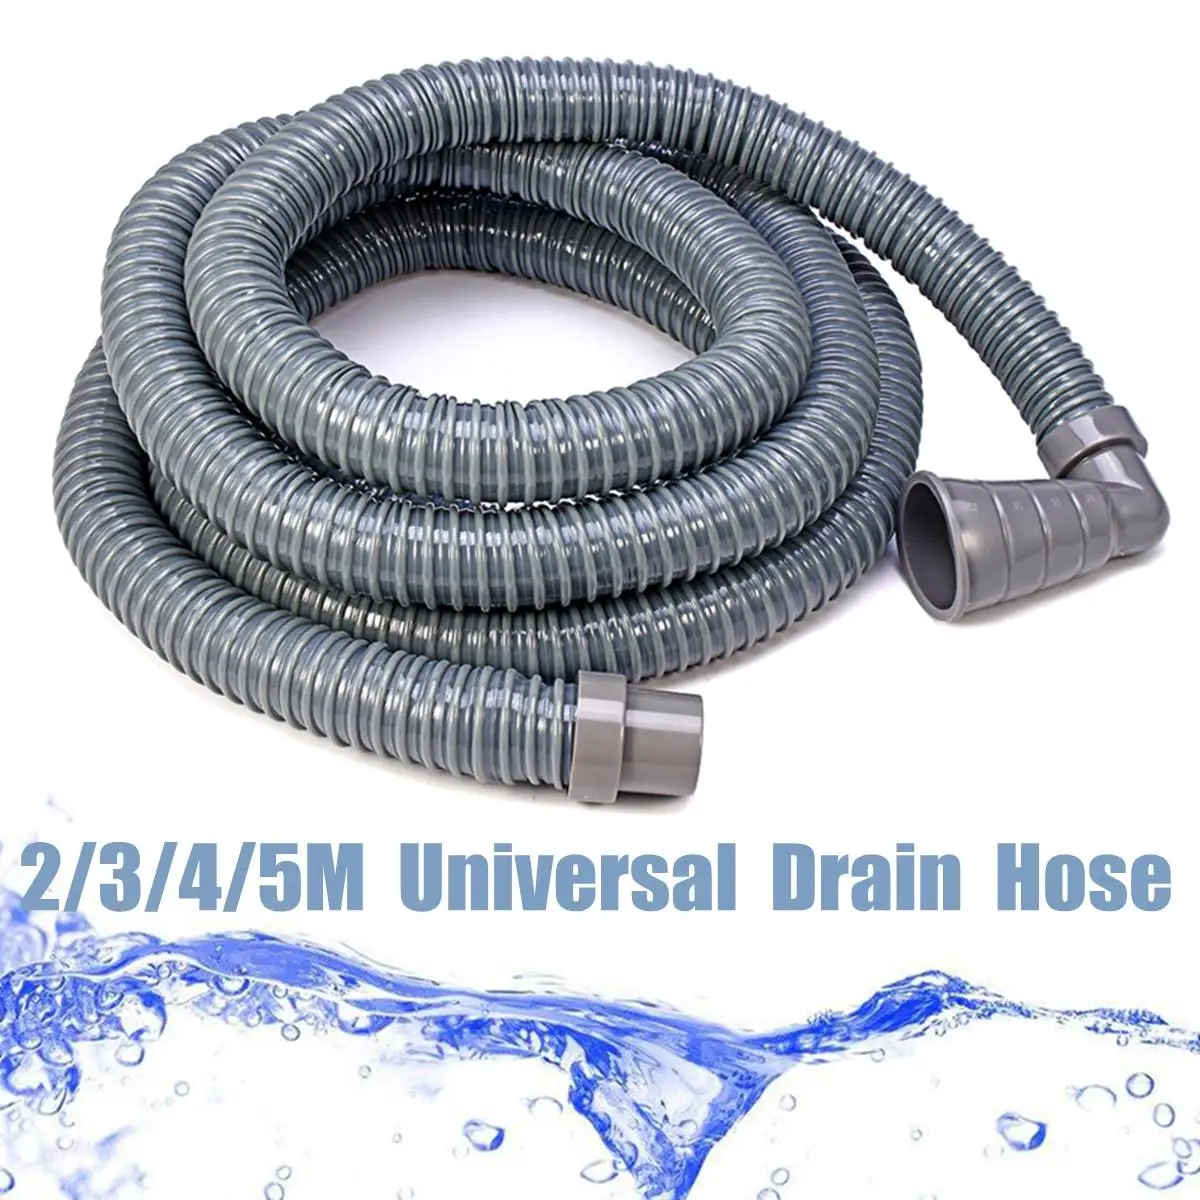 

2/3/4/5M Extension Washer Hose Washing Machine Hose Kitchen Outlet Drain Hose Flexible Water Connector Pipe Bathroom Replacement